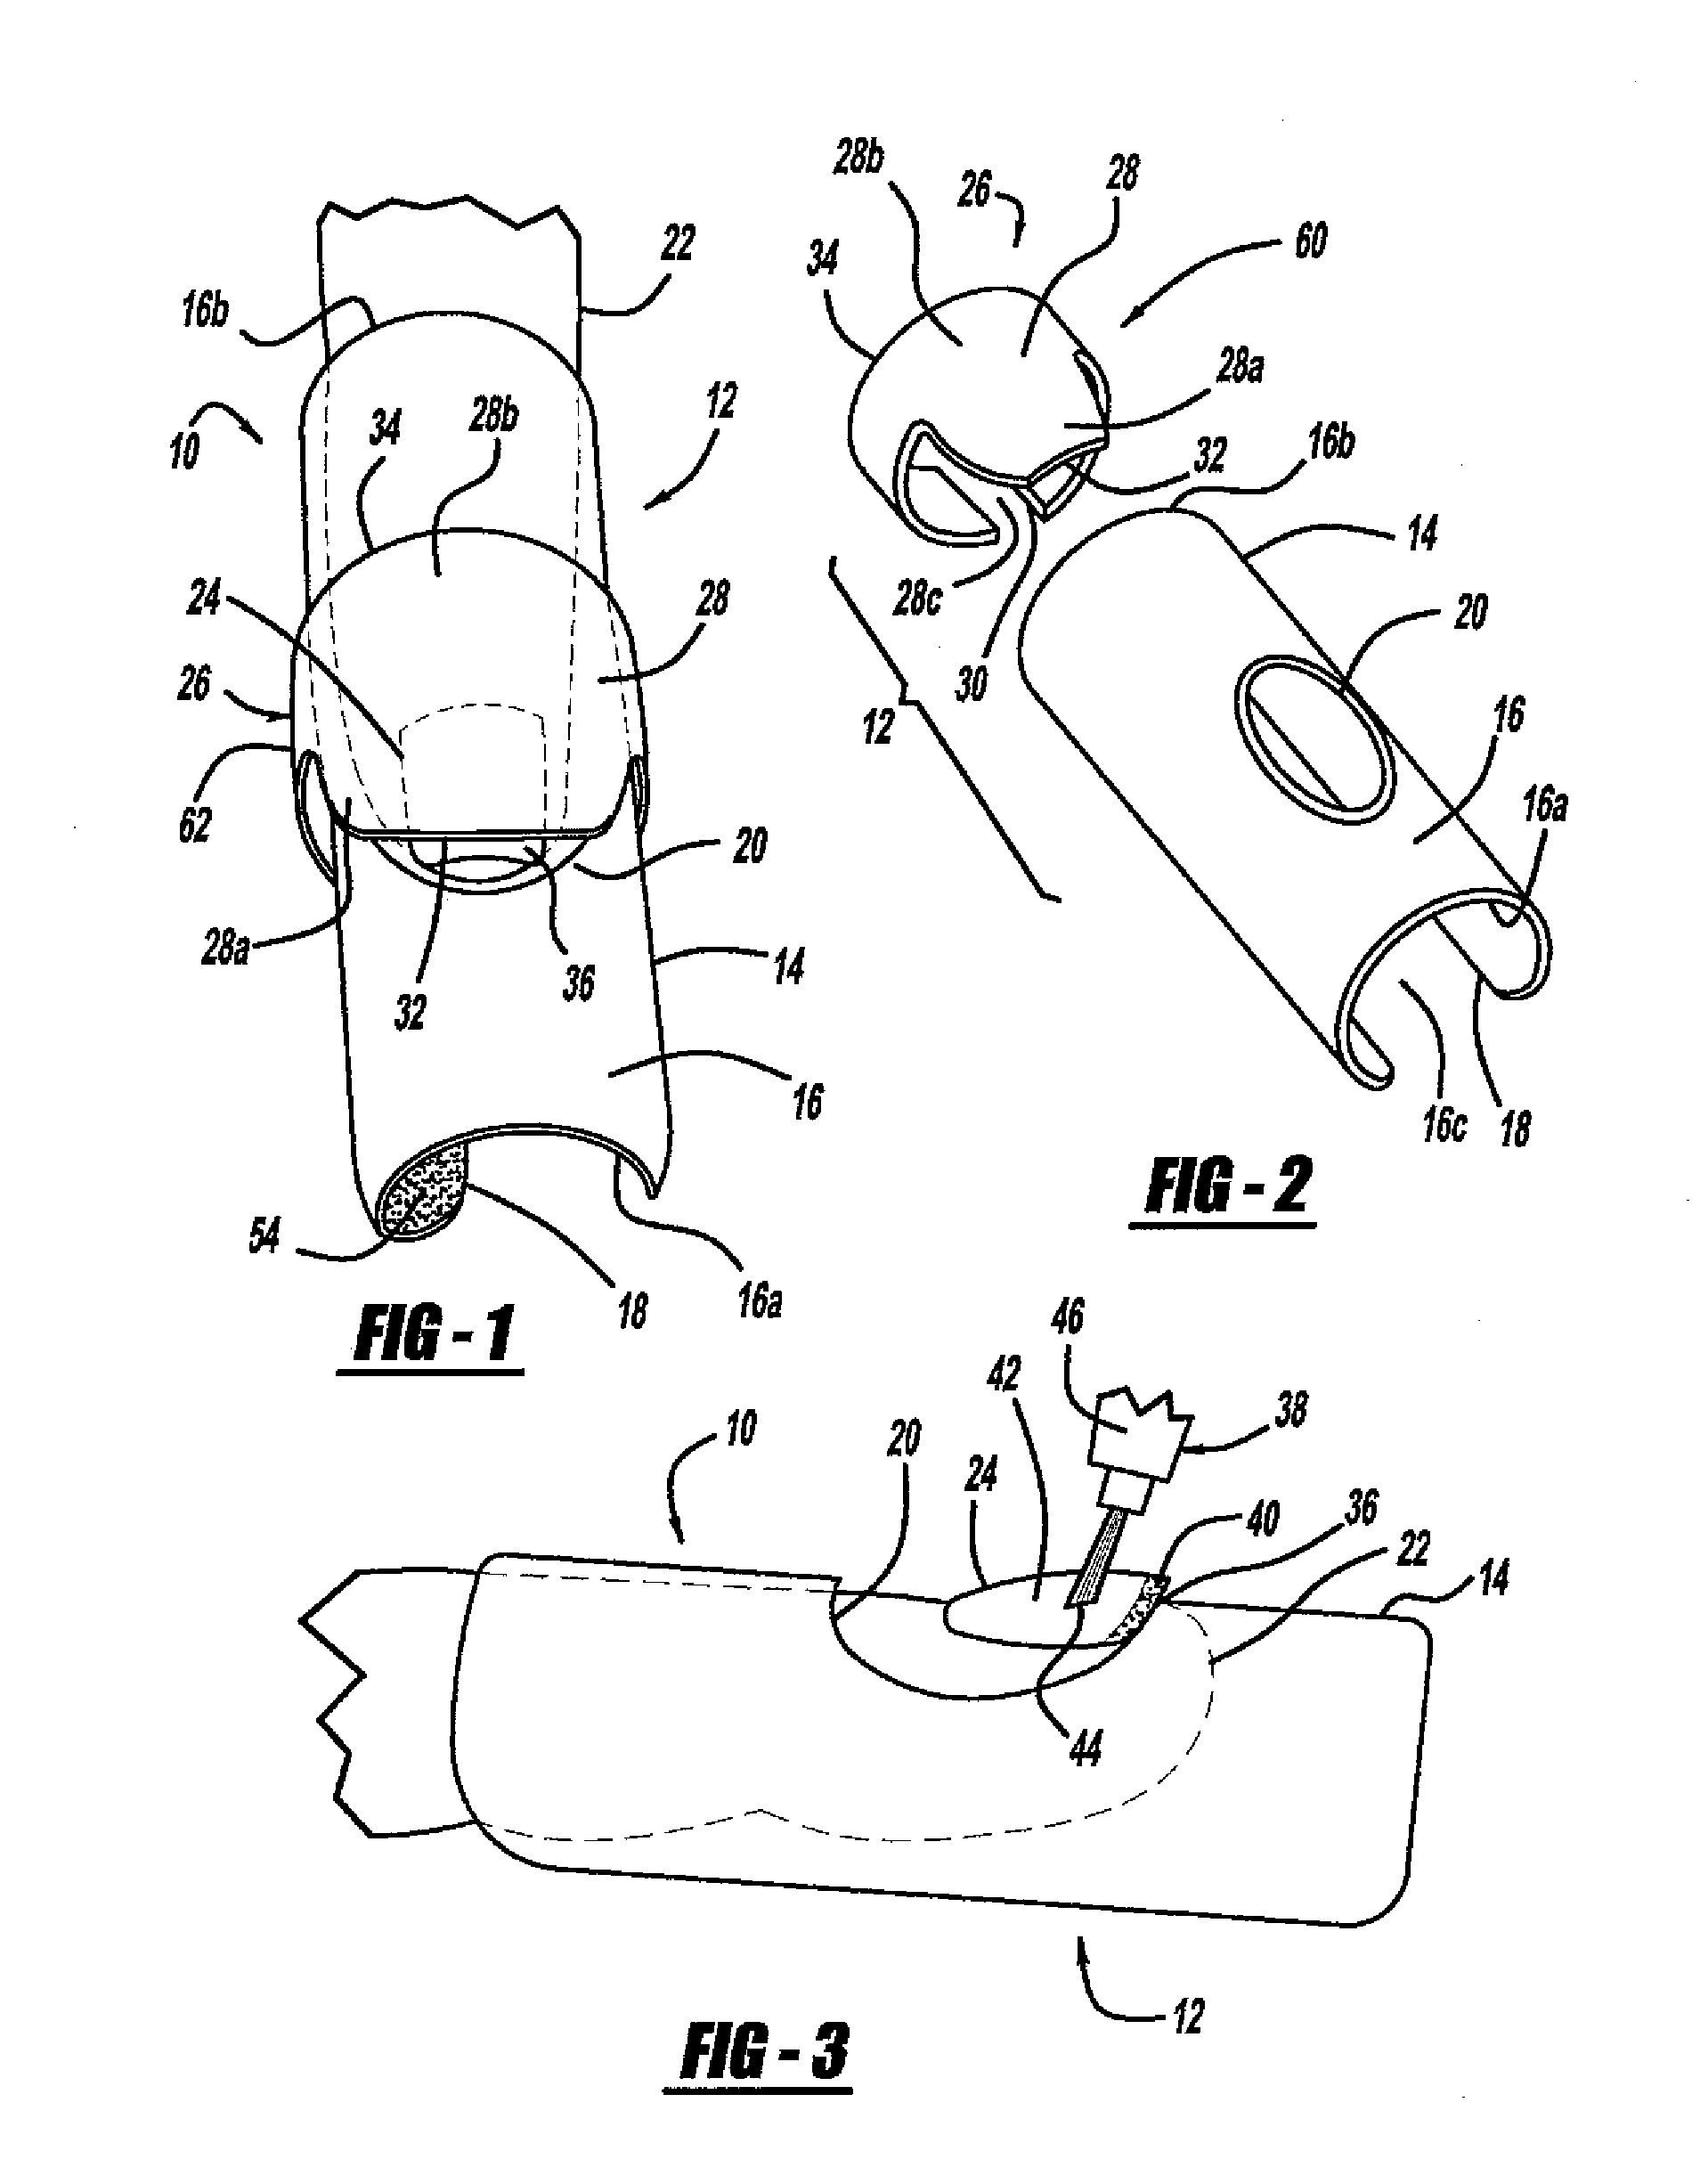 System, method and apparatus for self-applying a french manicure